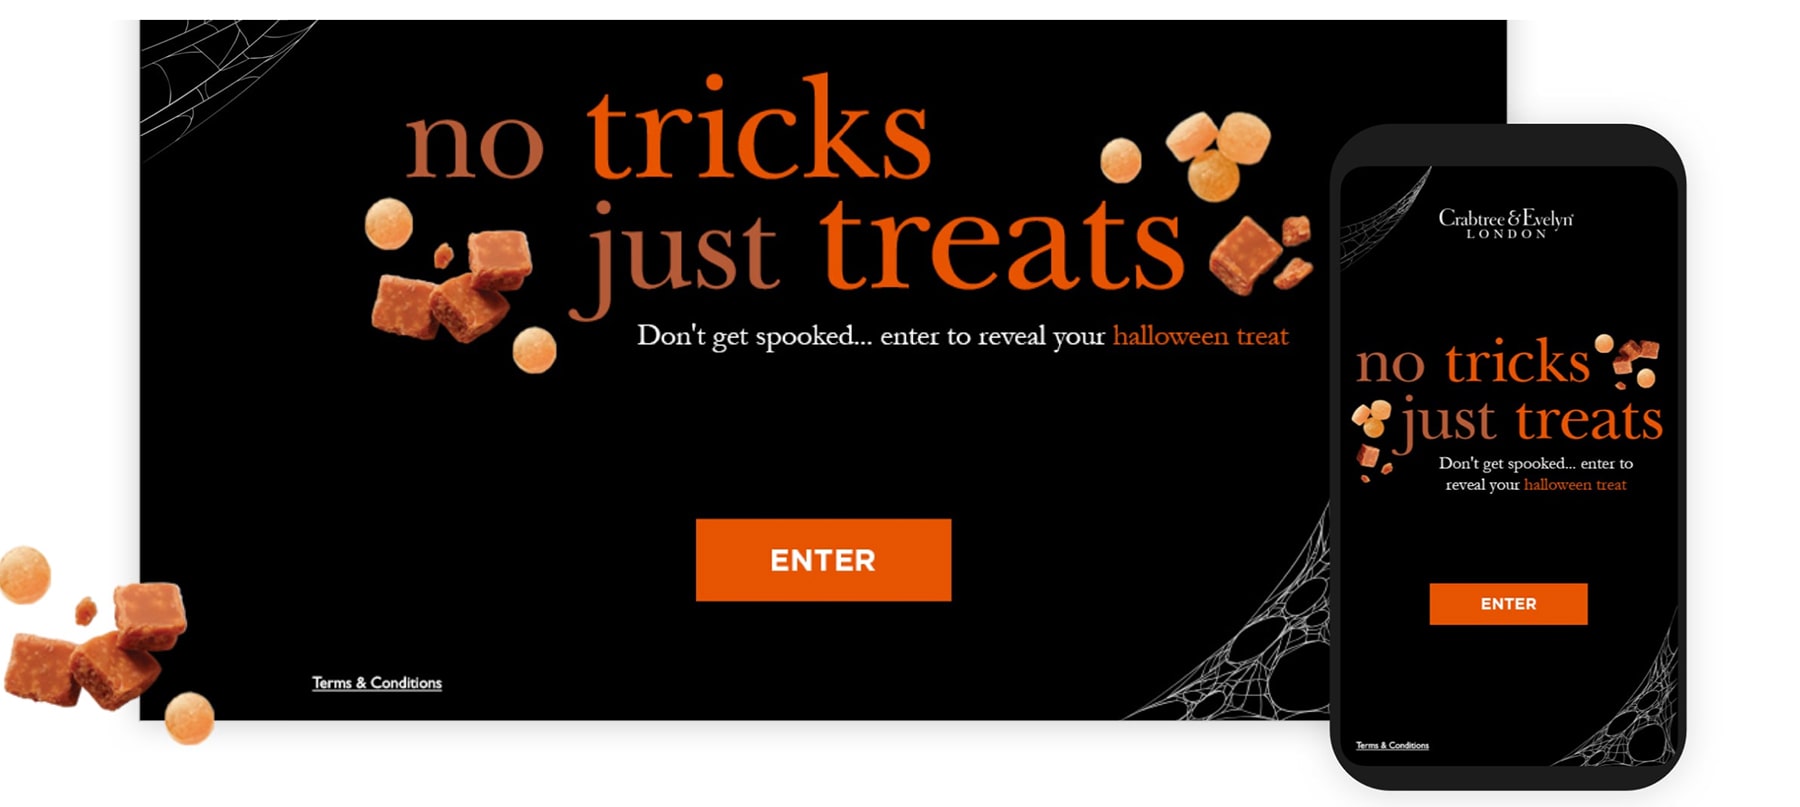 An example of a cross-channel Halloween-themed campaign microsite, from Crabtree & Evelyn